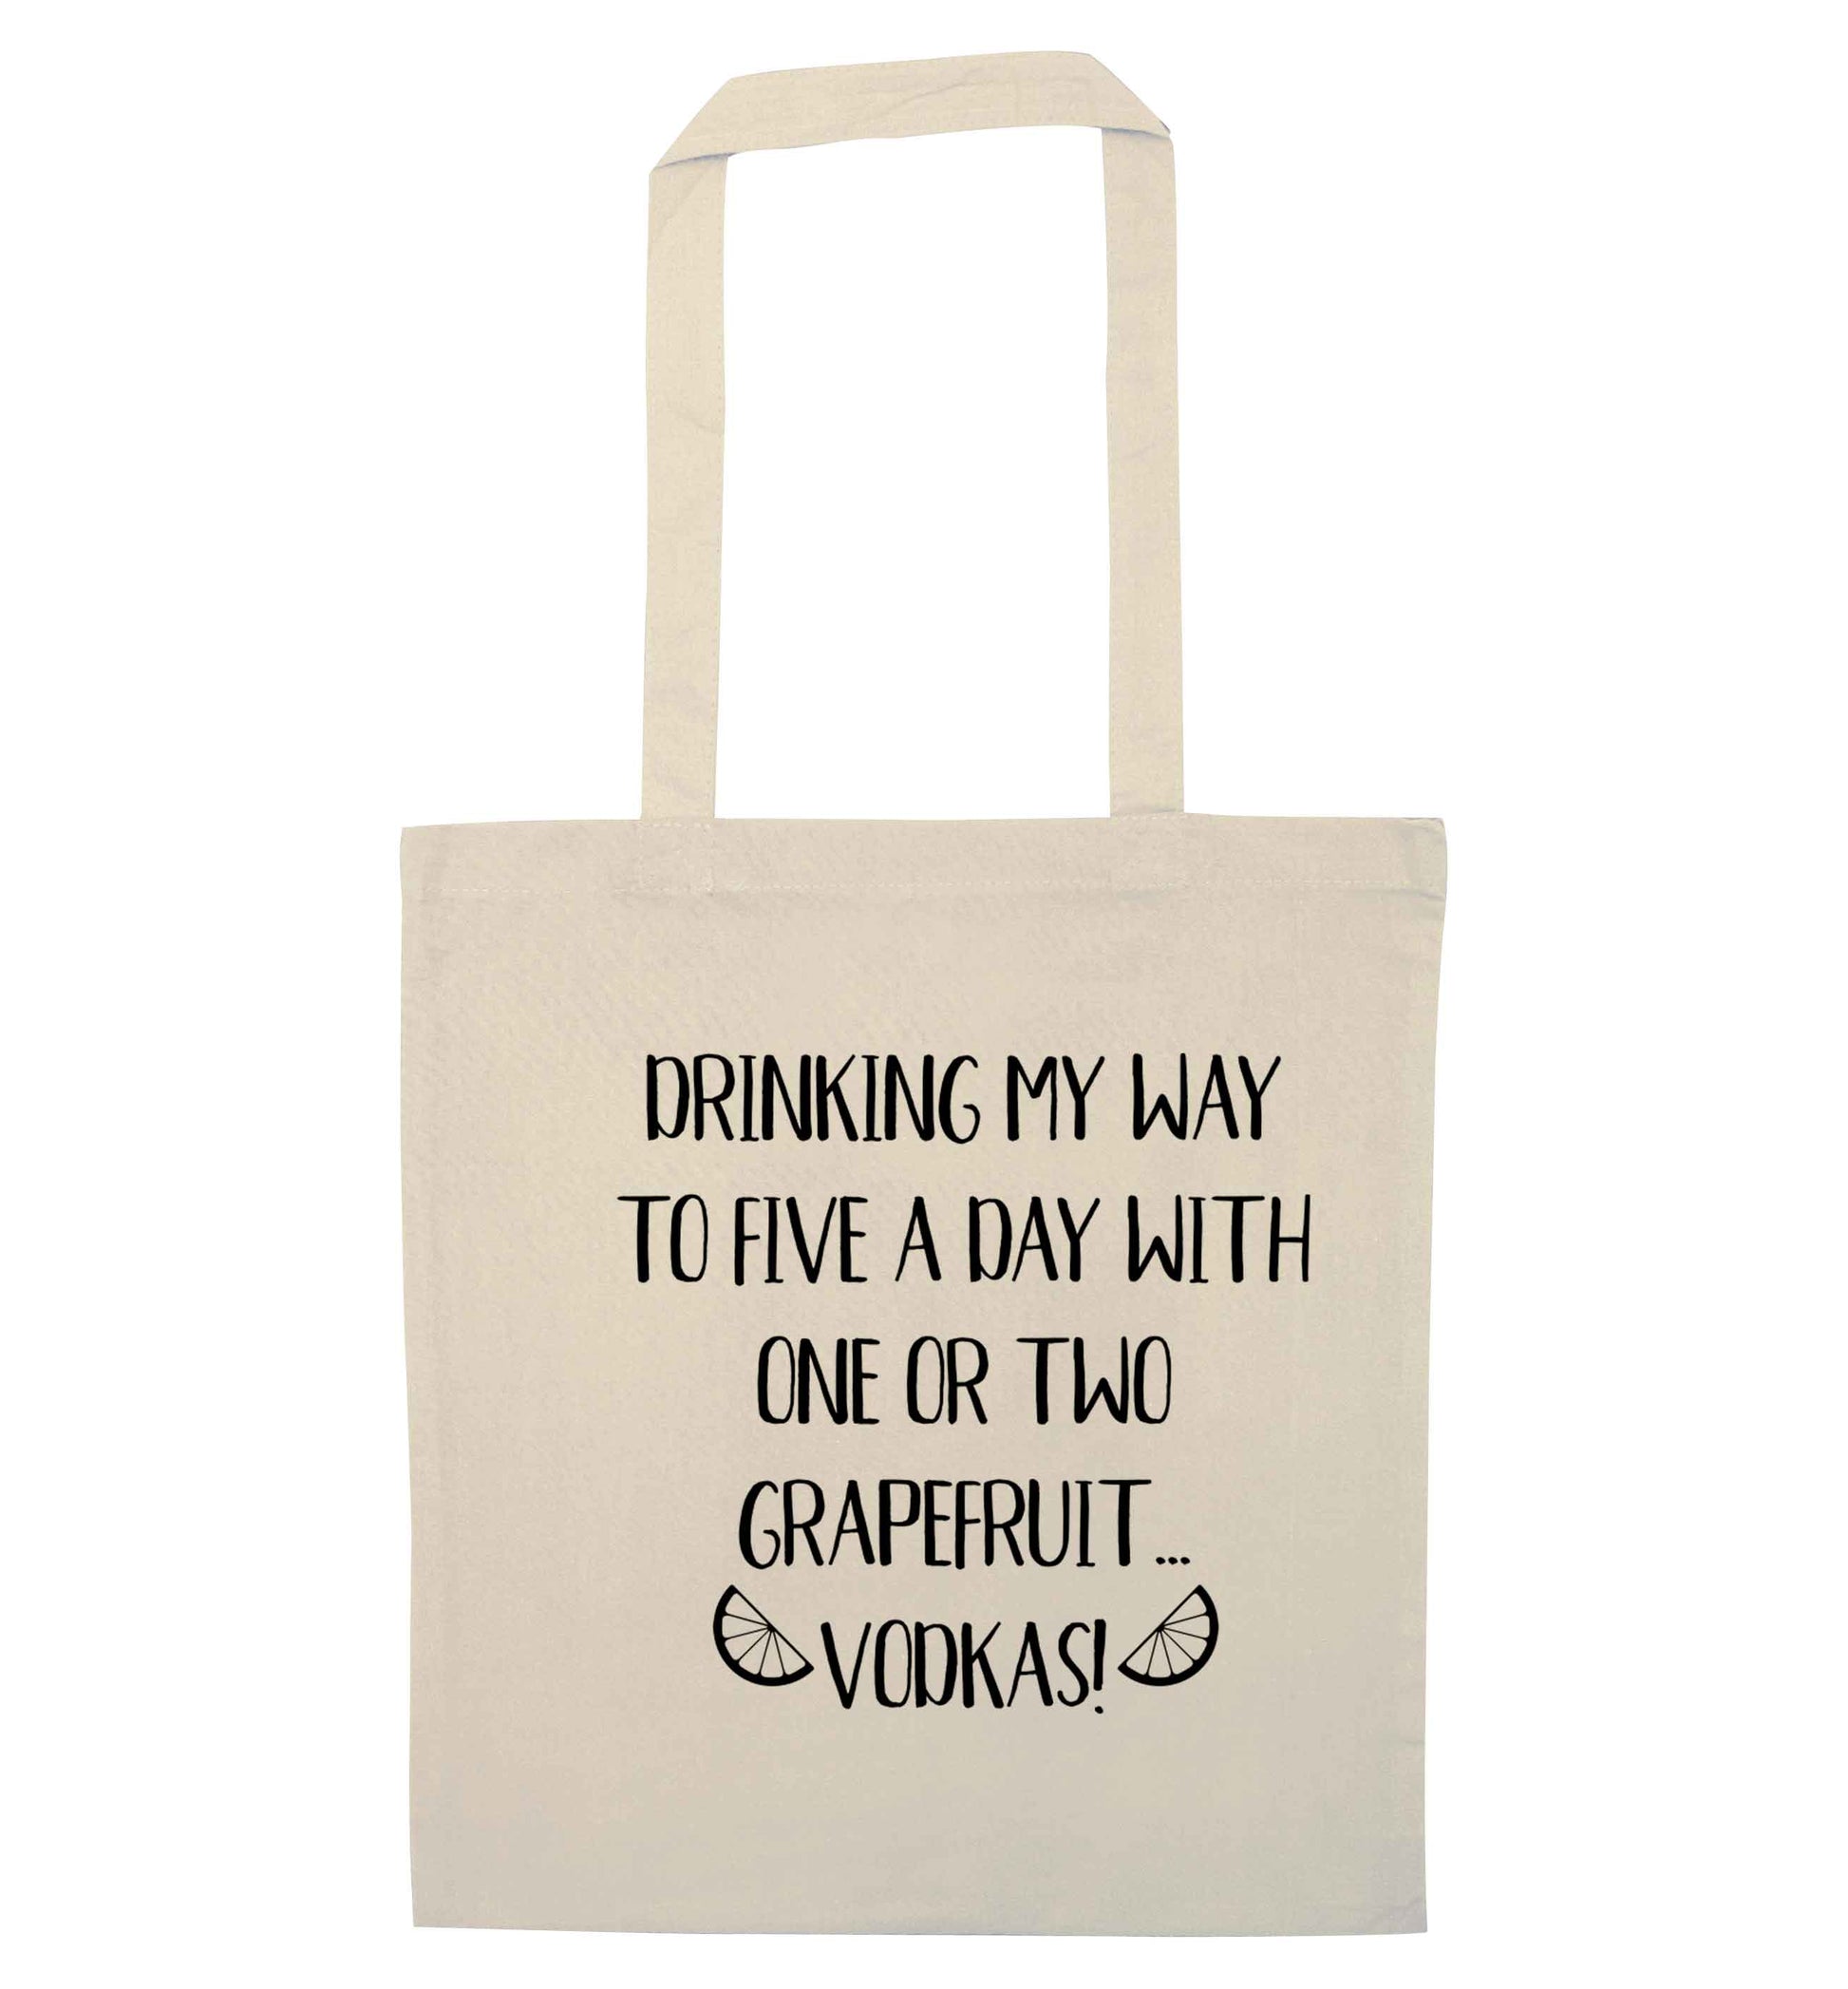 Drinking my way to five a day with one or two grapefruit vodkas natural tote bag